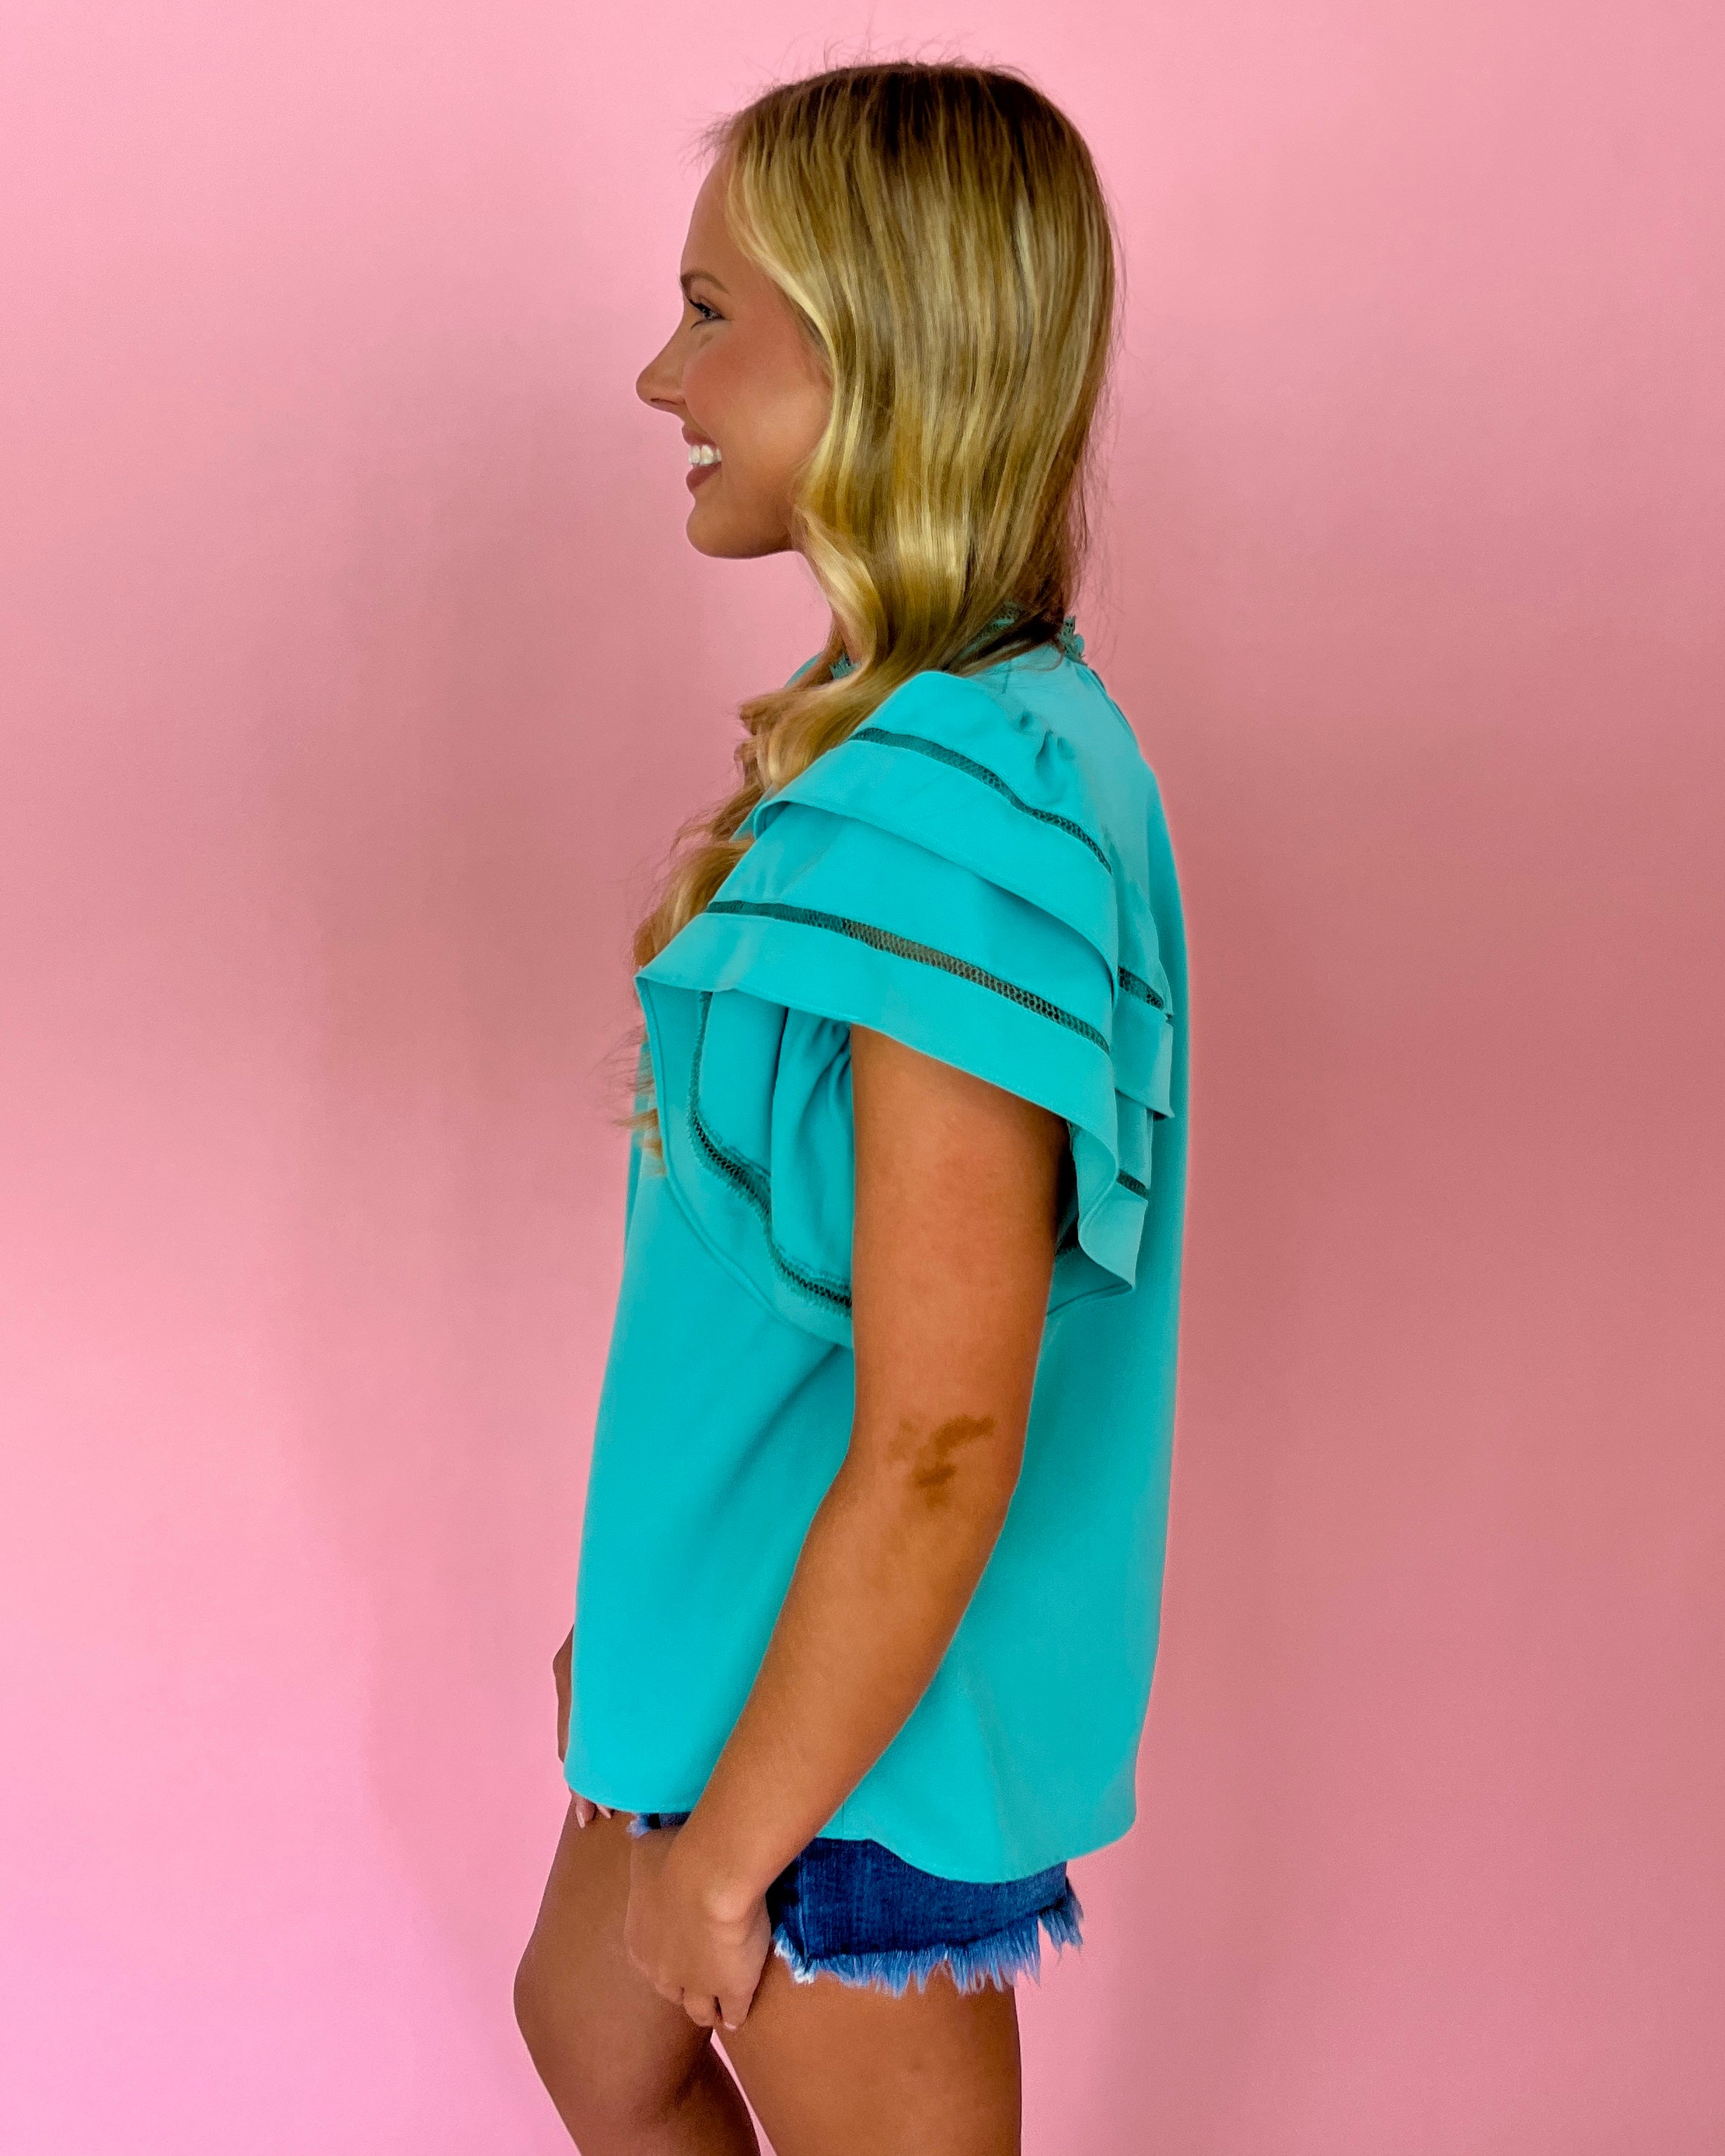 Sunny Days Aqua Double Layer Sleeve Mock Neck Top-Shop-Womens-Boutique-Clothing